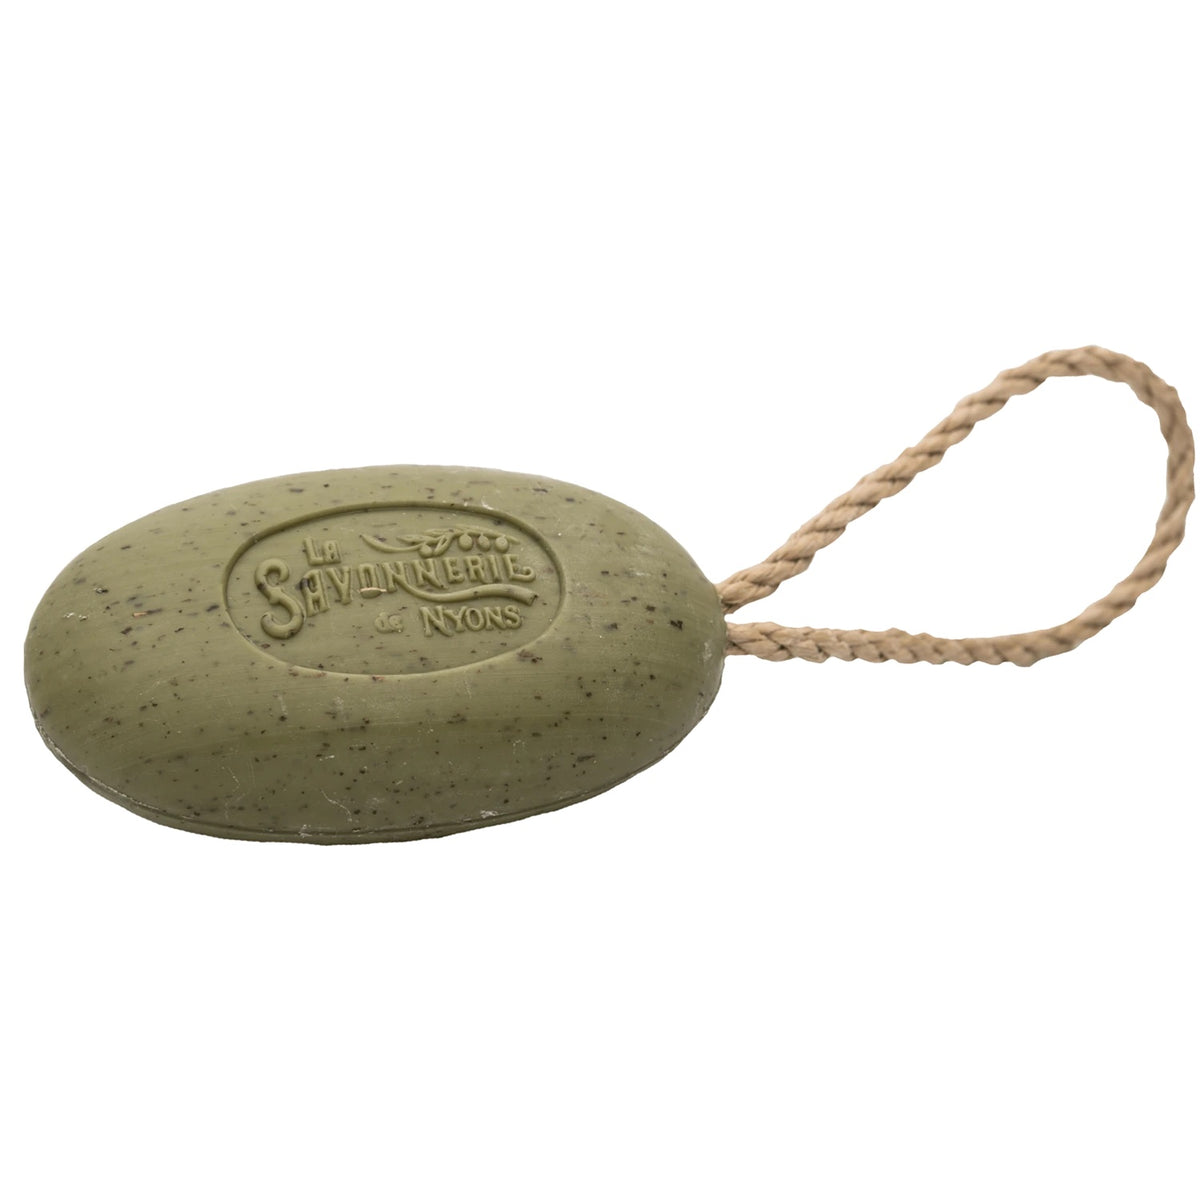 Oval-shaped La Savonnerie de Nyons Exfoliating Green Olive Soap bar with embossed text and a rope handle, isolated on a white background.